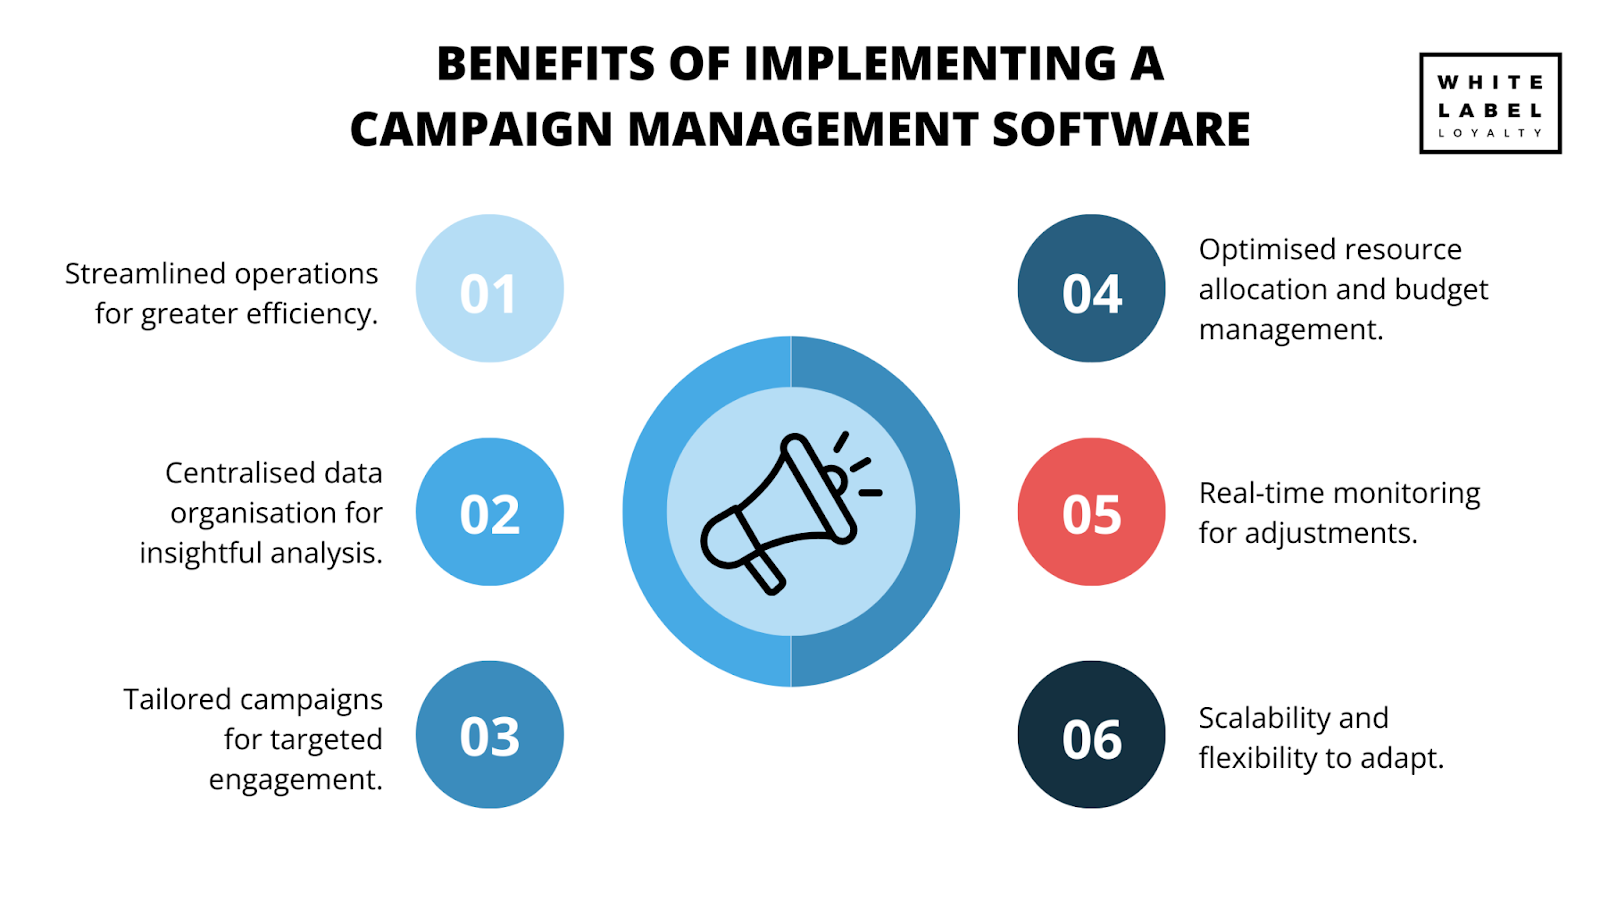 What are the benefits of implementing a campaign management software?